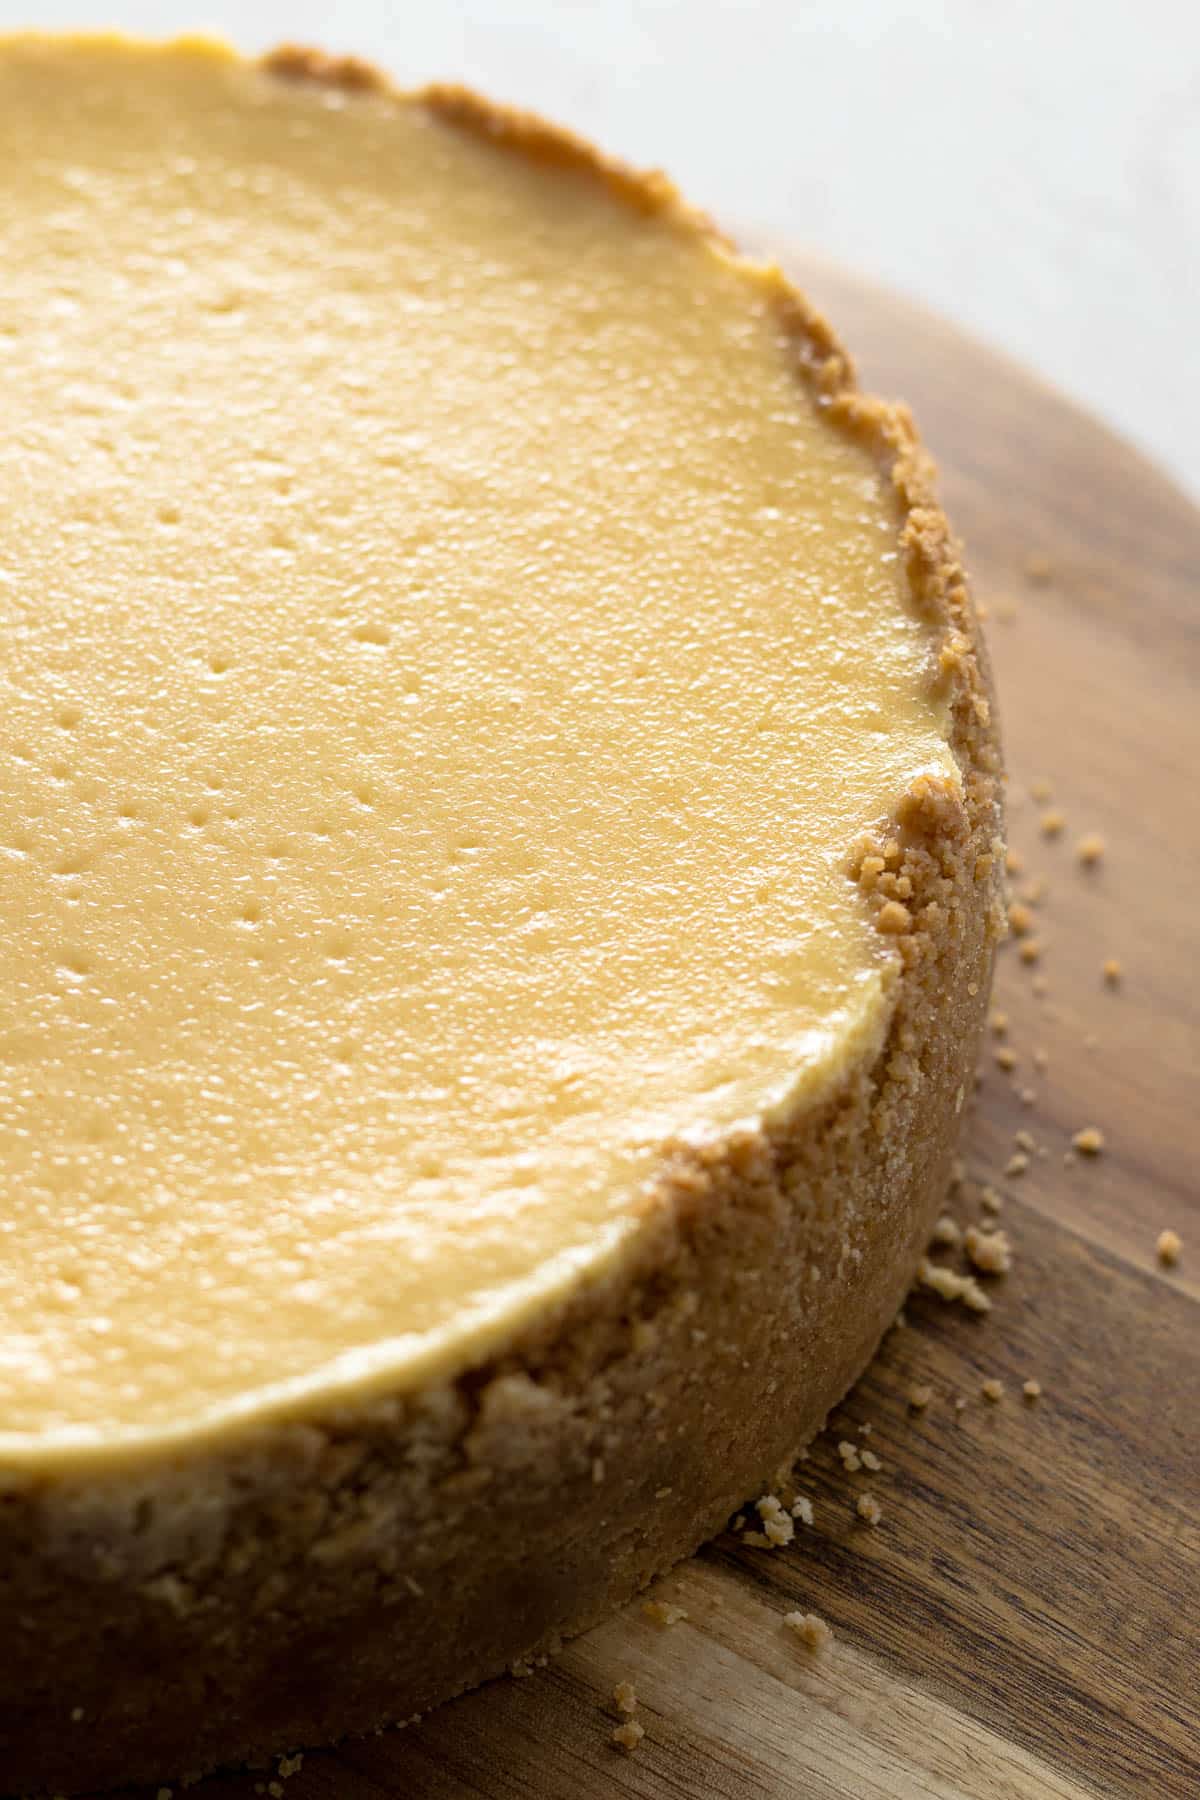 Unsliced New York cheesecake on a serving board.